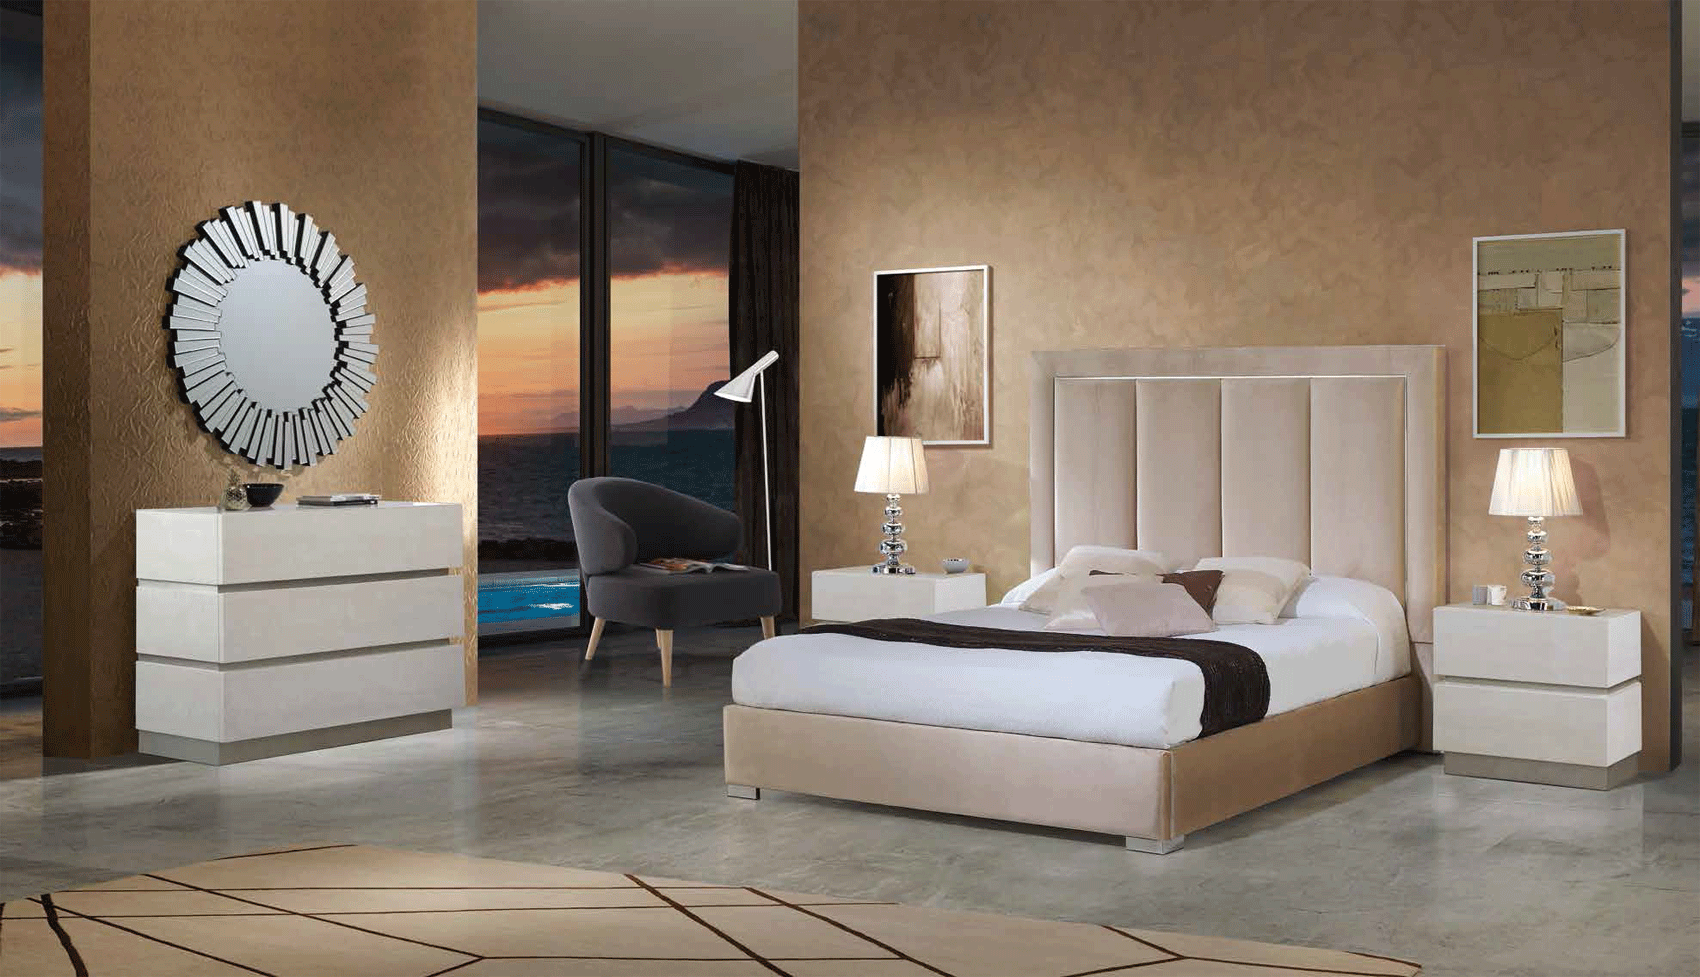 Bedroom Furniture Beds with storage 871 Monica, M-151, C-151, E-100, DC-1366, YP440-N